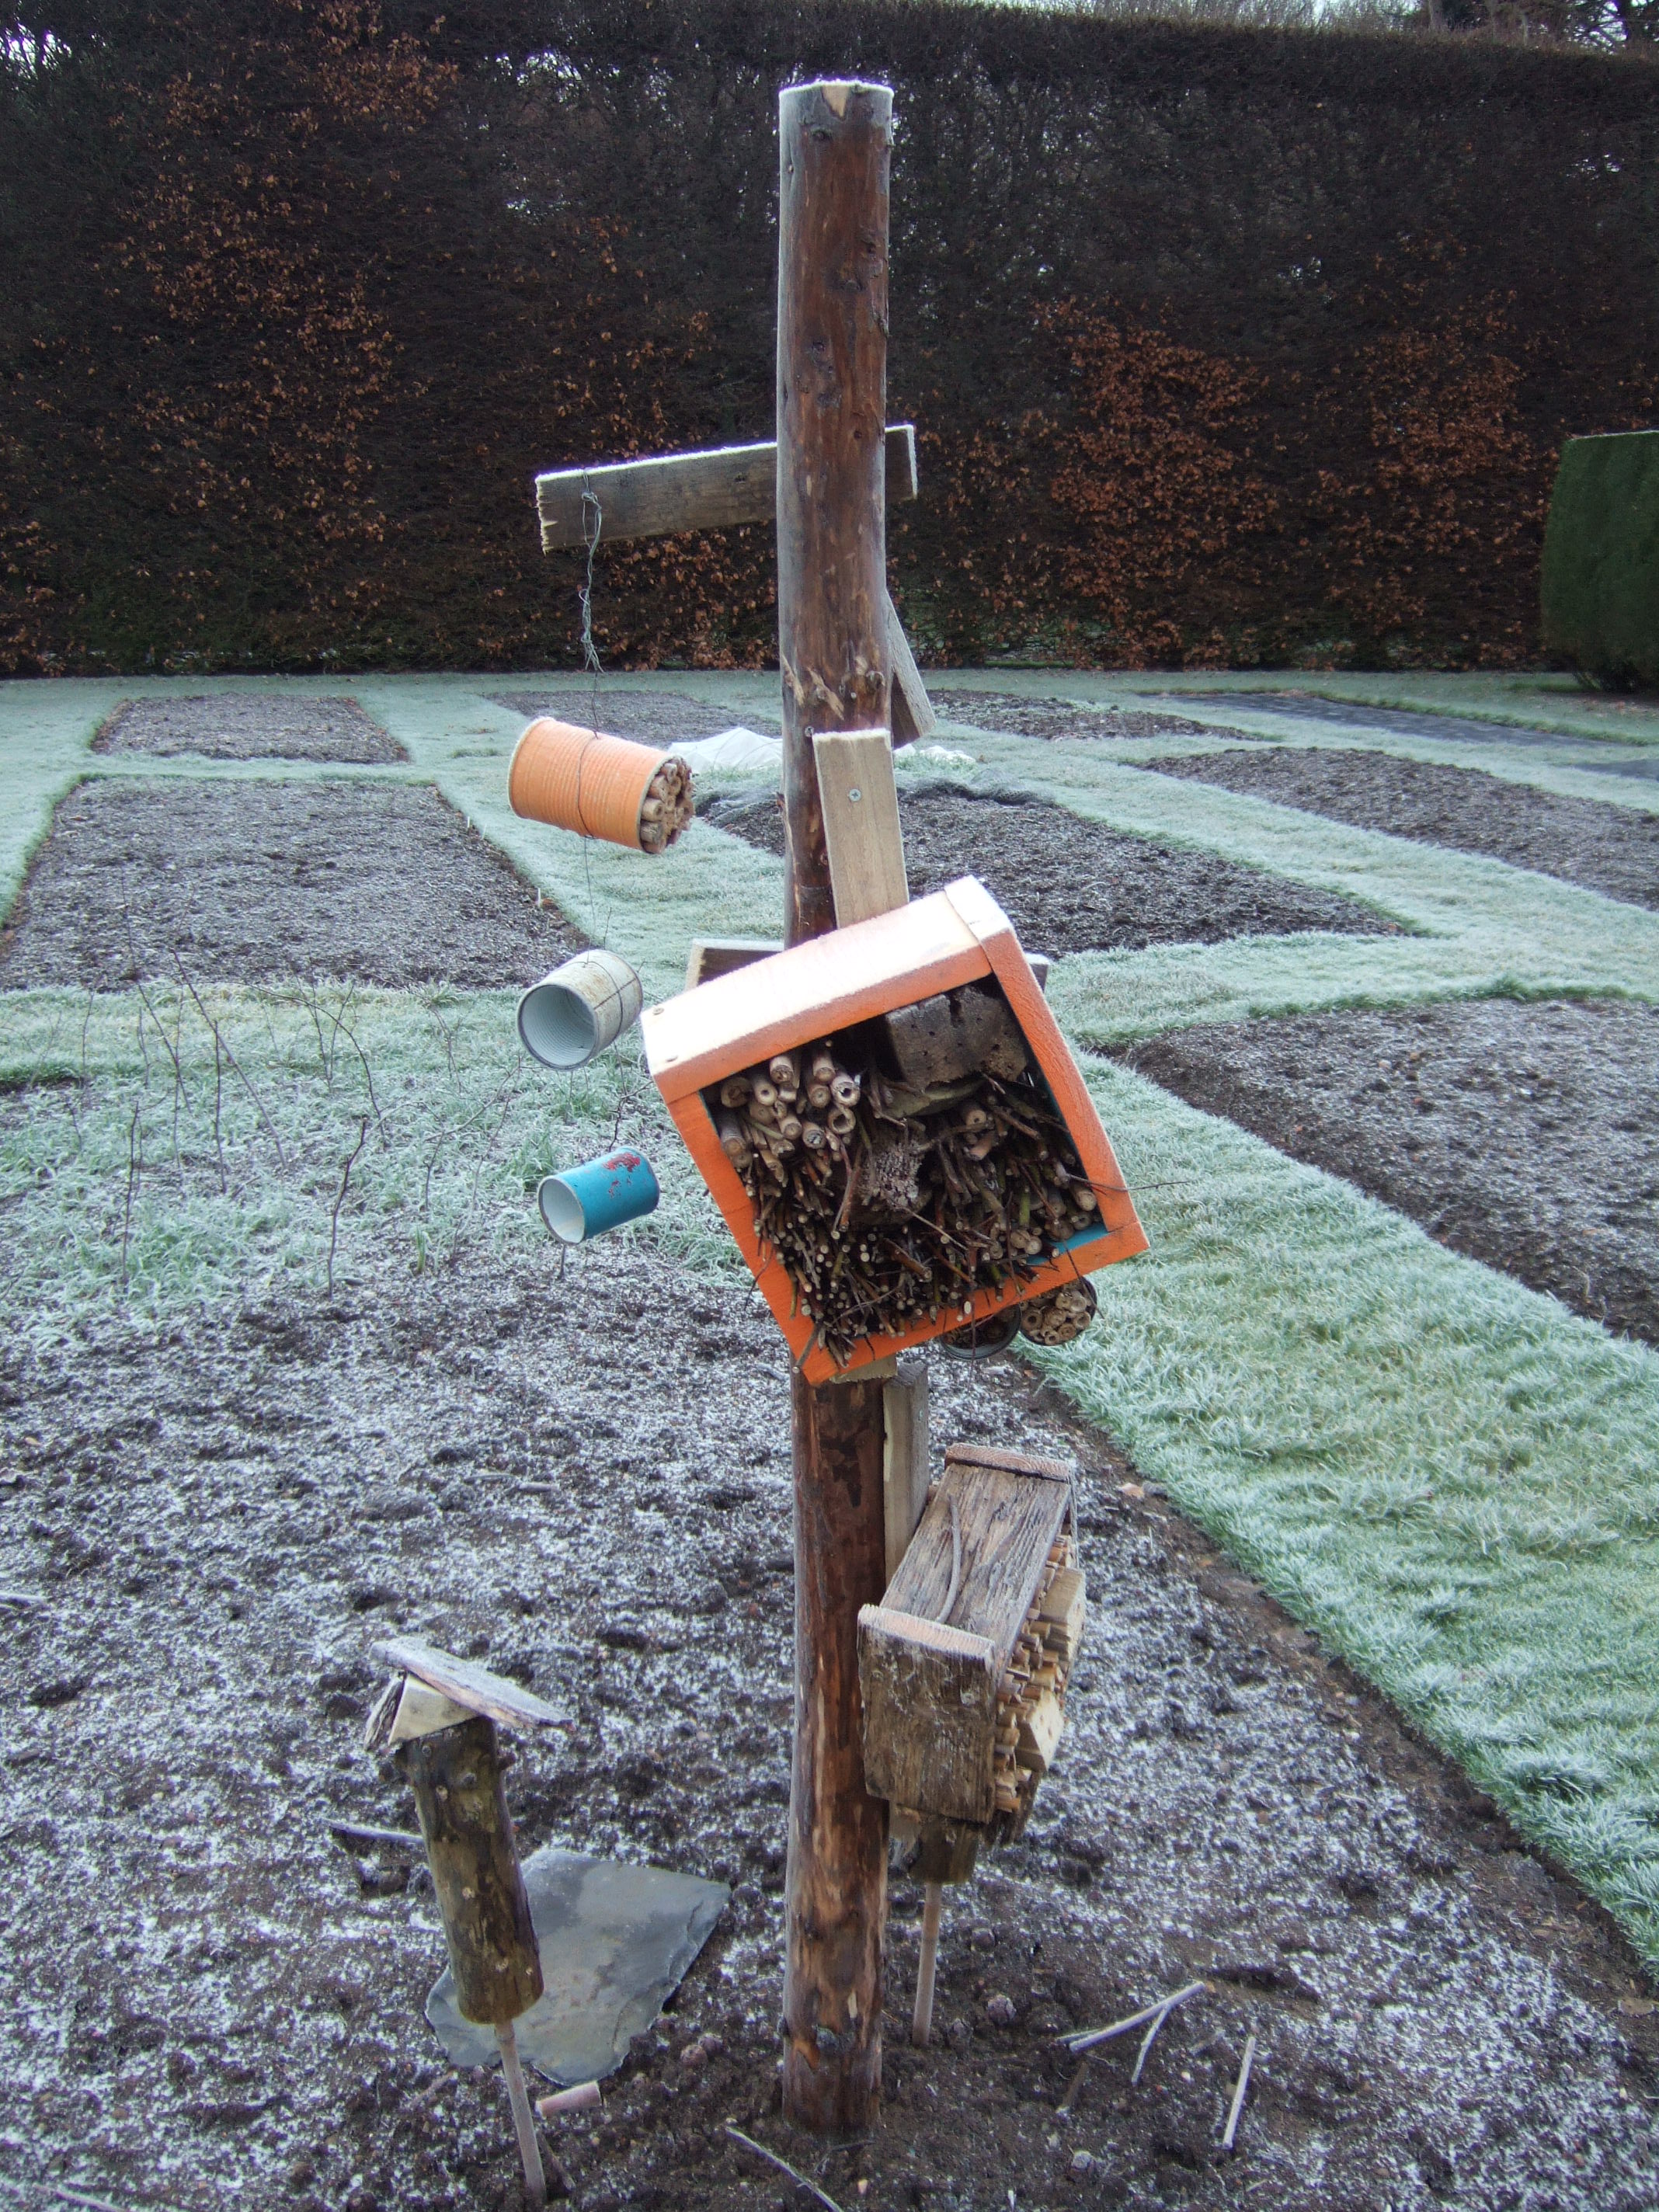 ‘Insect hotel tree’ – made from recycled materials